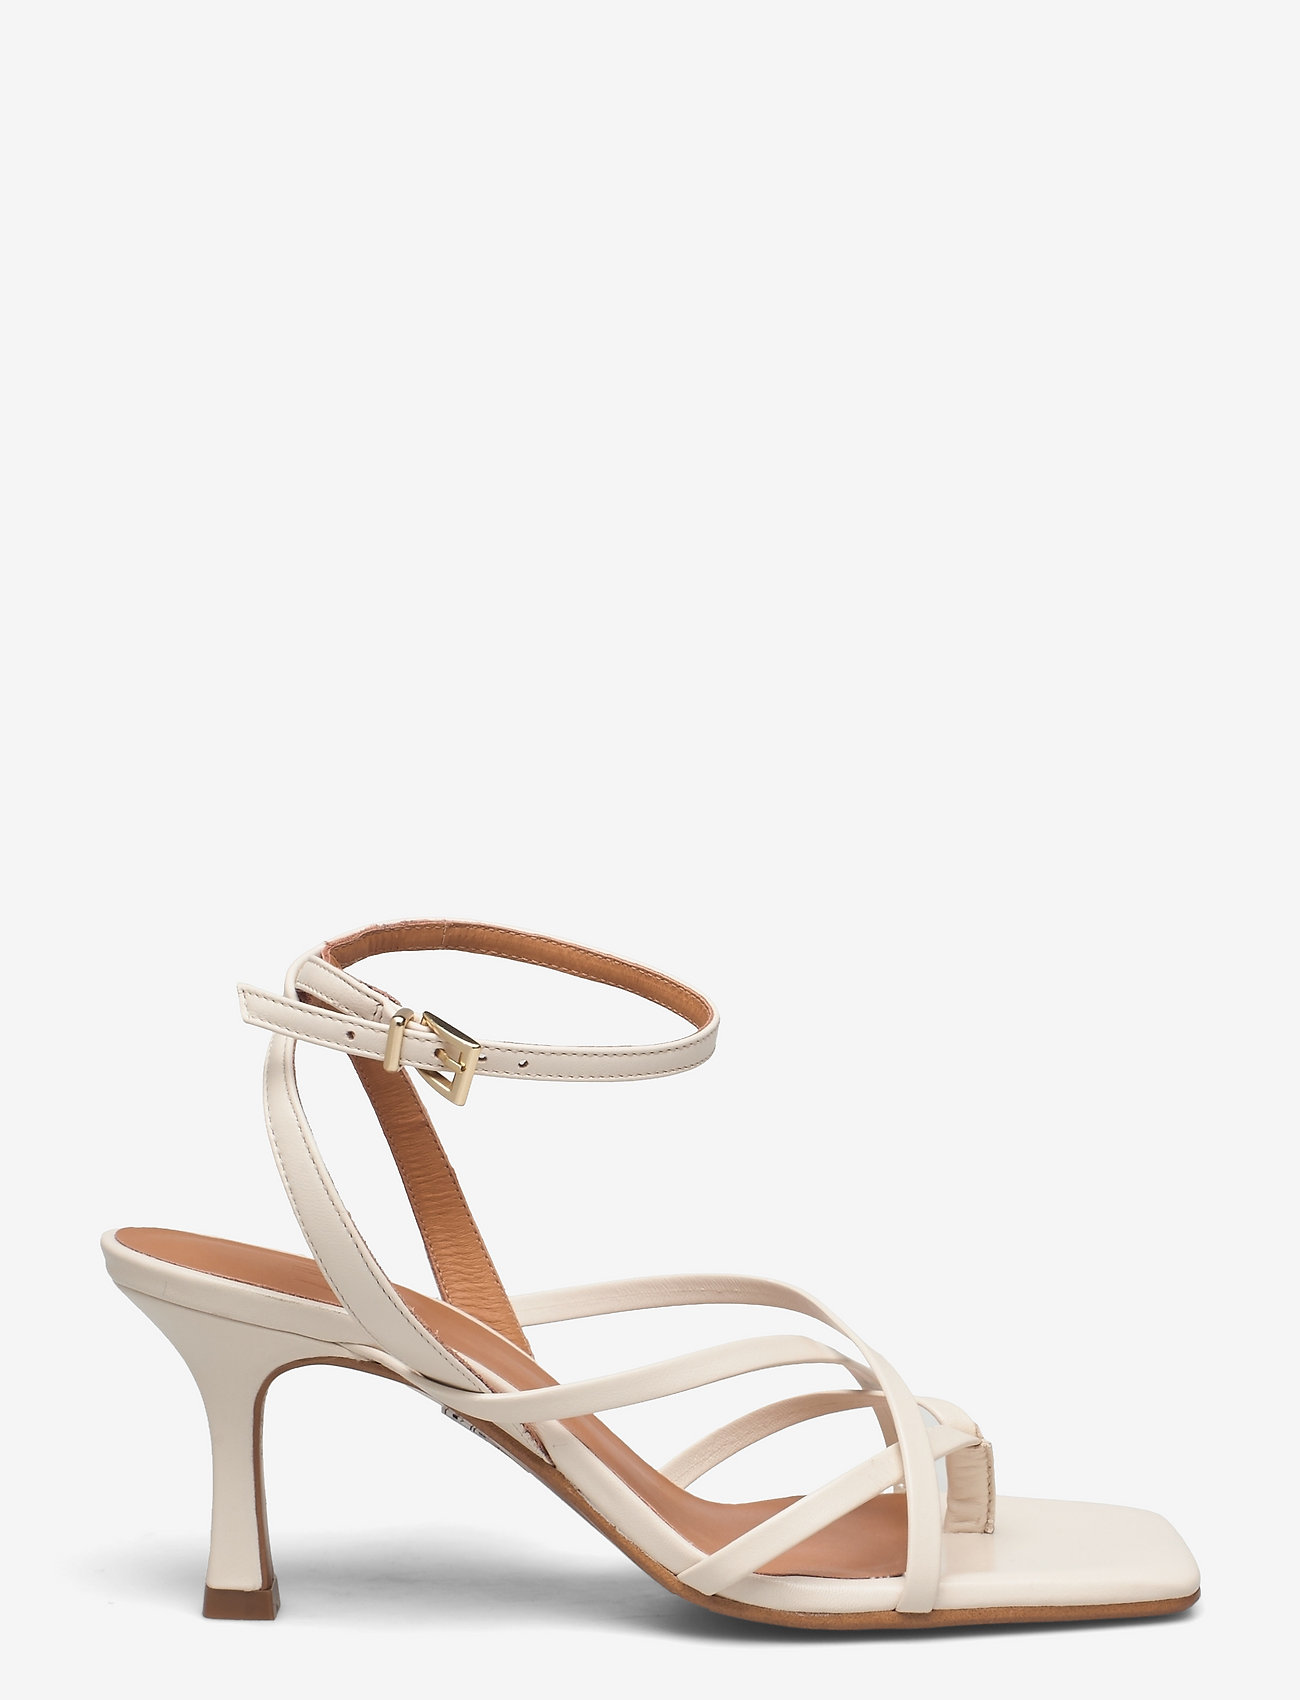 Billi Bi - Sandals - party wear at outlet prices - off white nappa 73 - 1